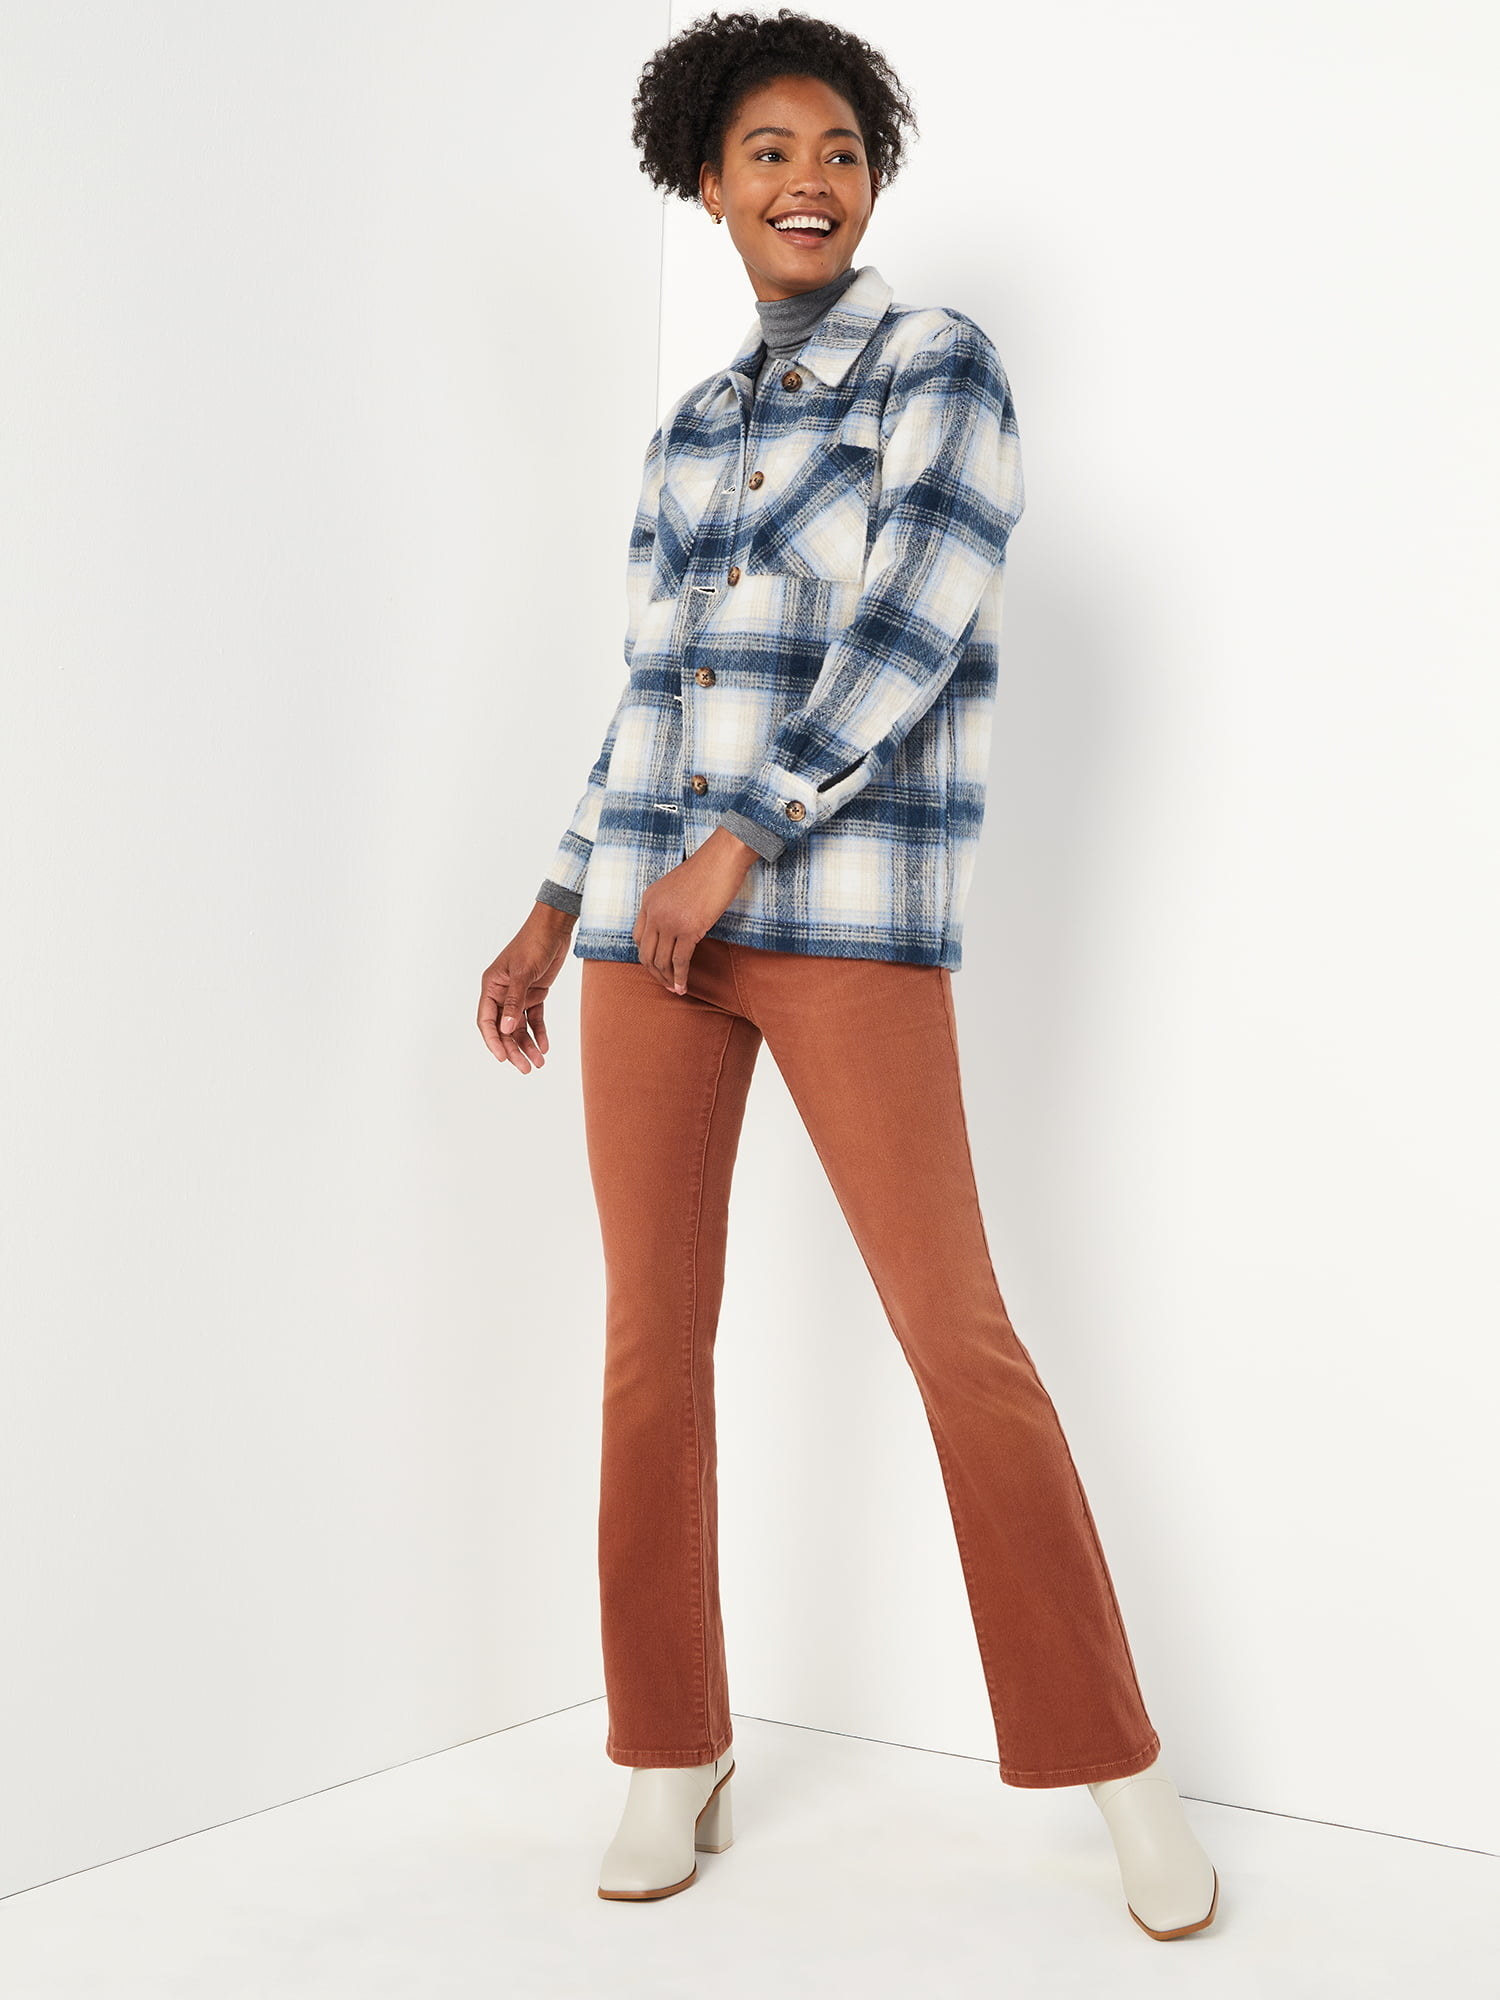 Model wearing the burnt orange pants with a flannel top and white boots